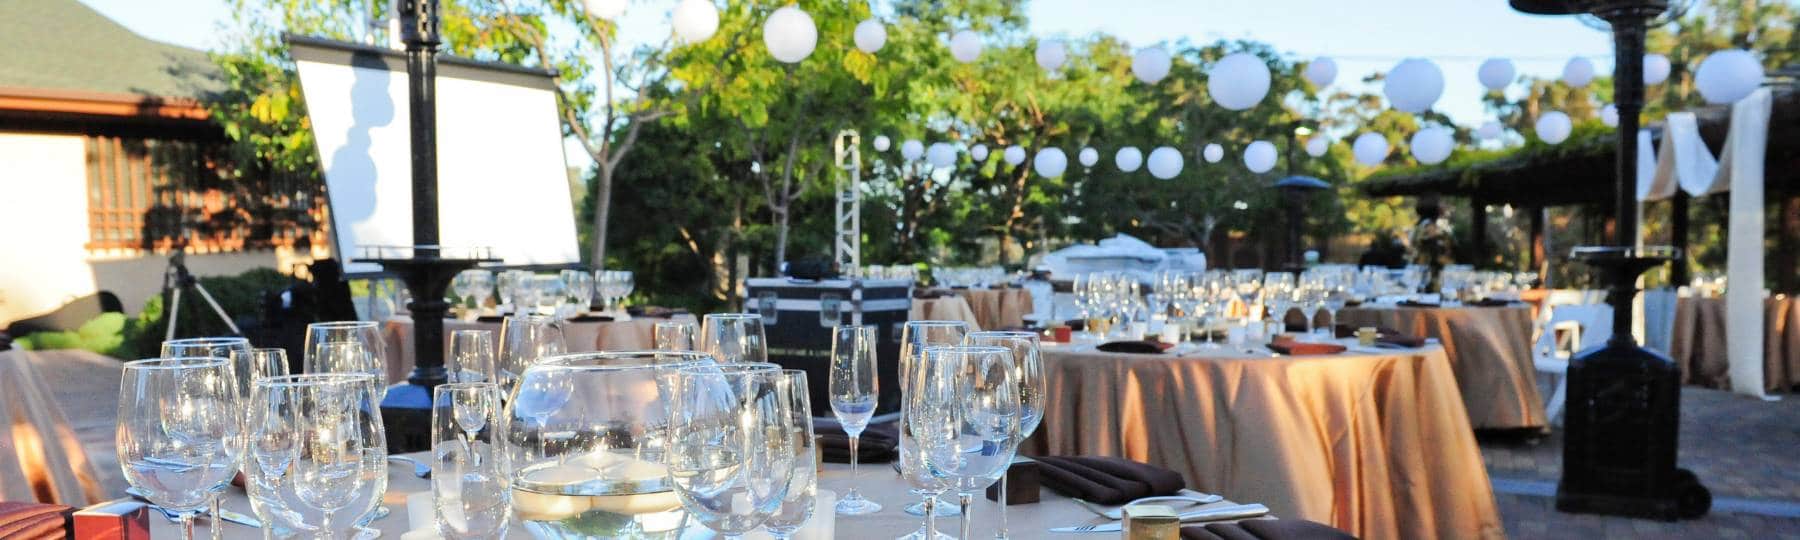 Outdoor Wedding Catering: Planning the Perfect Outdoor Dinner